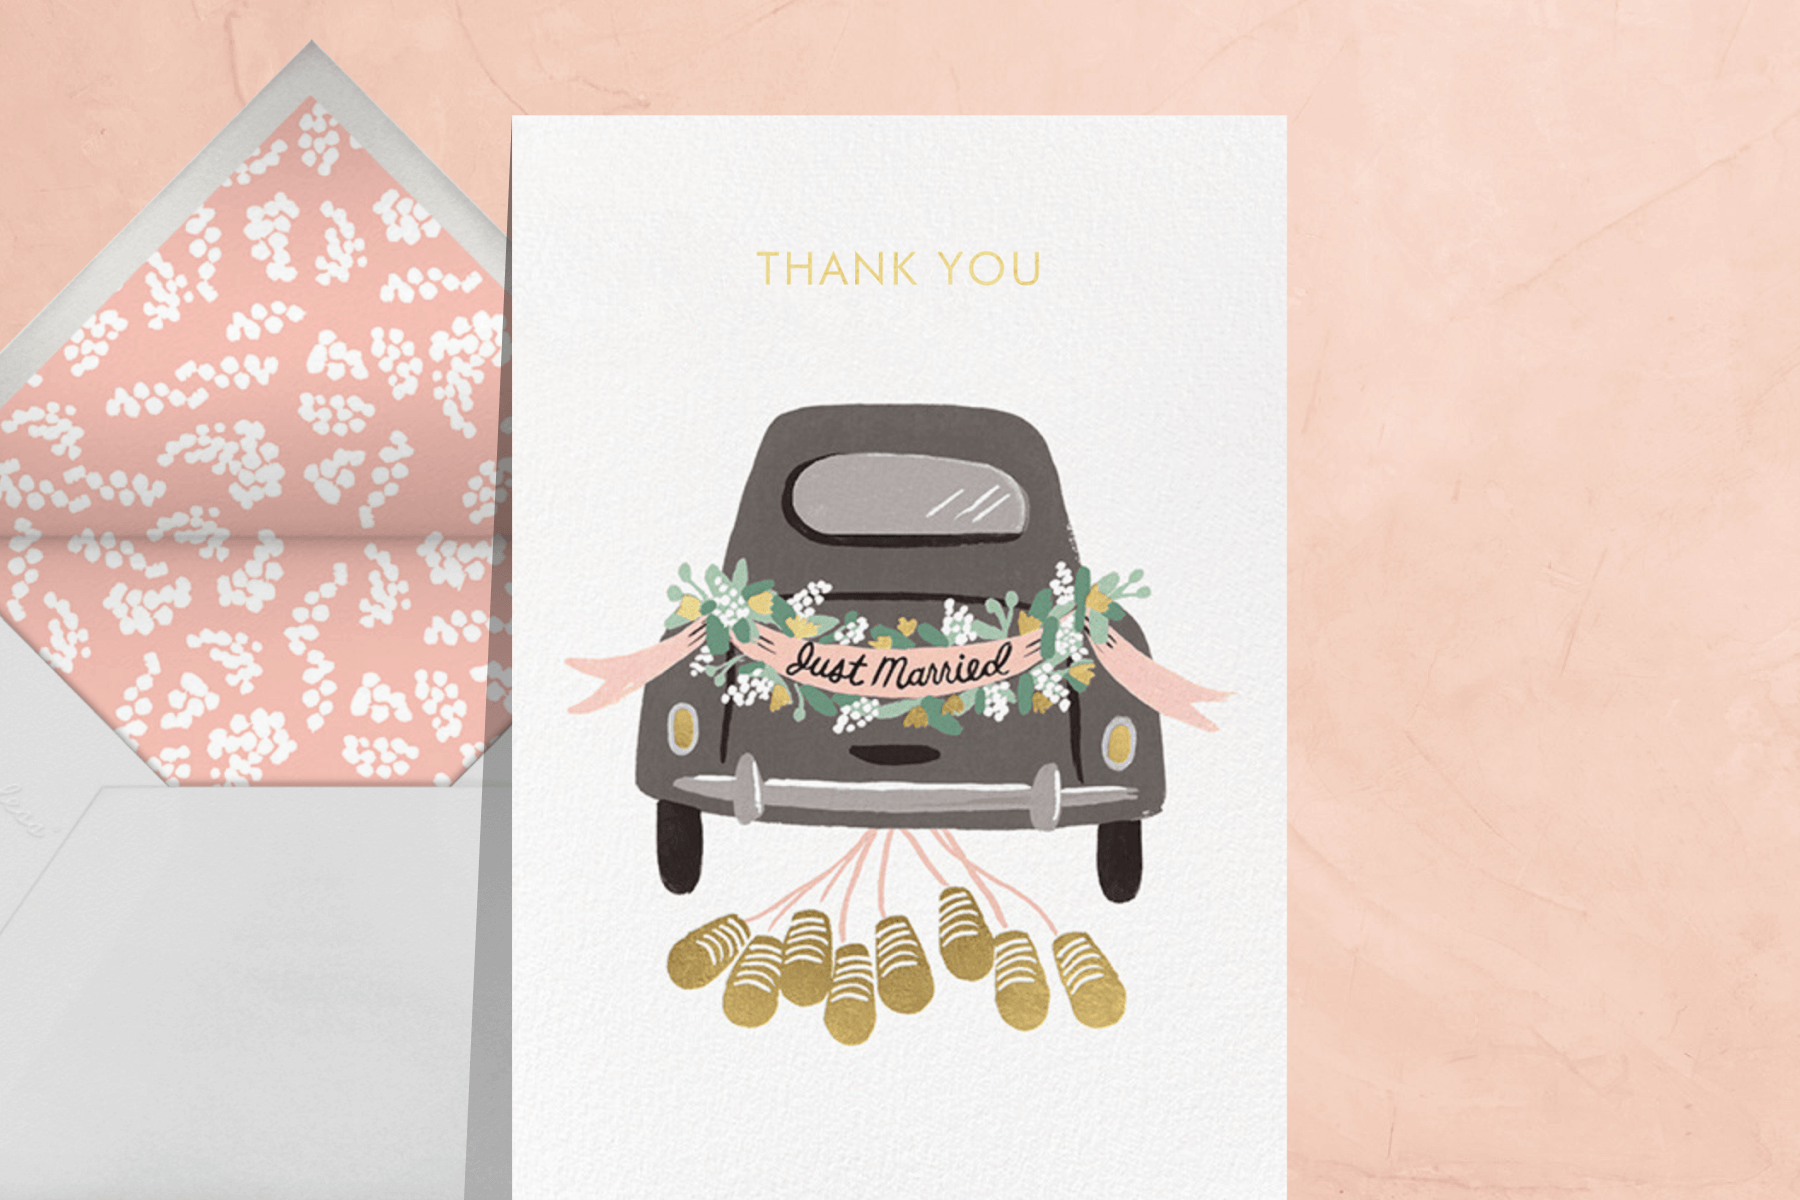 A thank you card with a painting of a truck with a “just married” banner and cans.